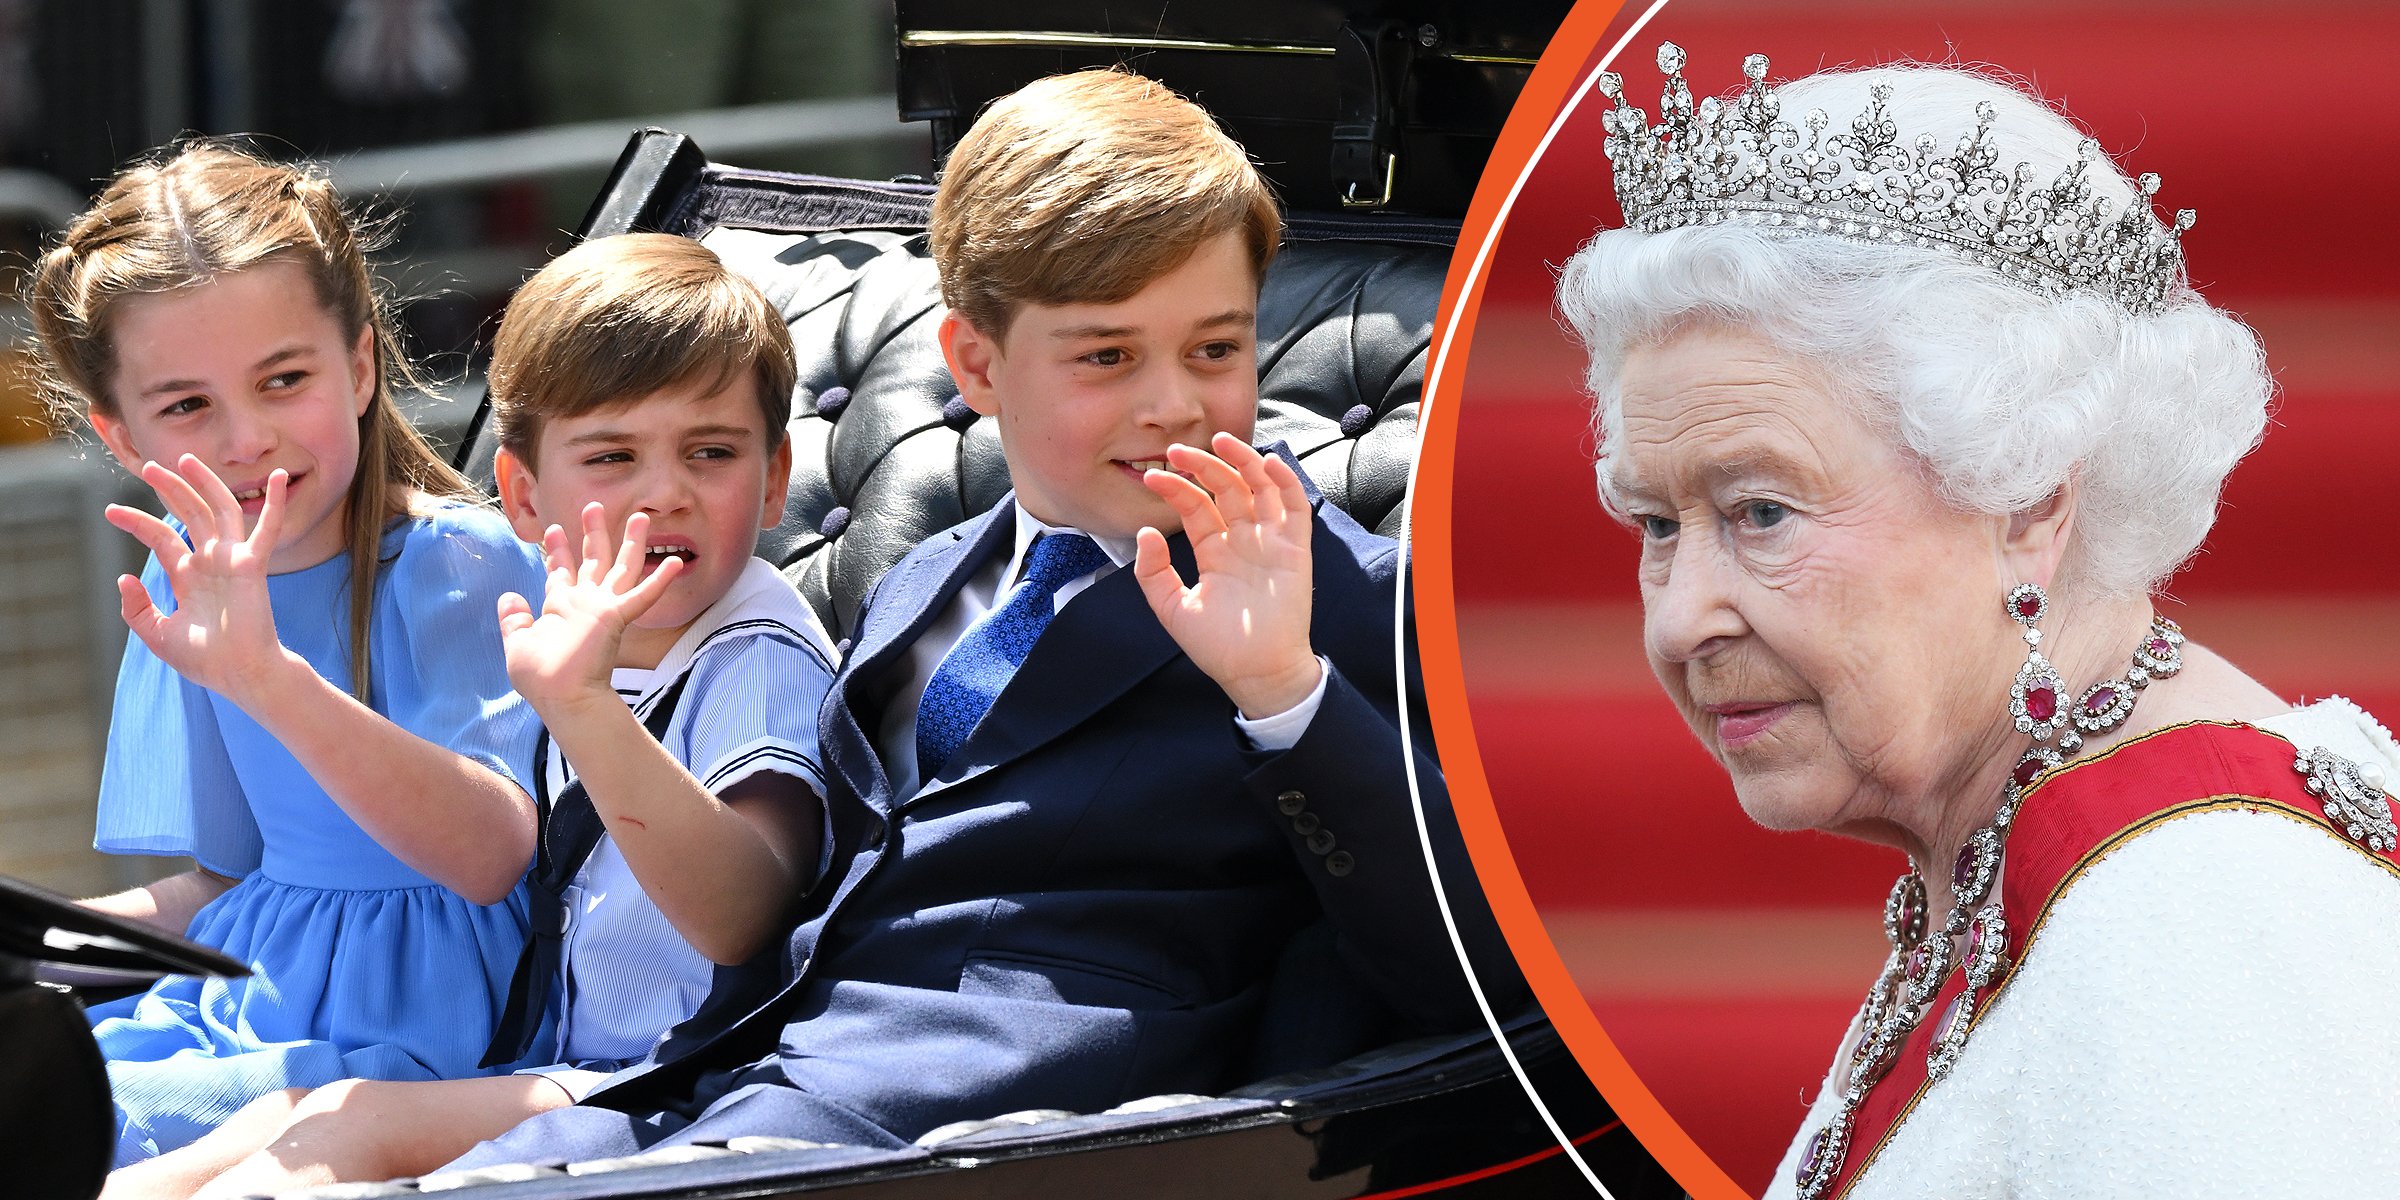 The Cambridge children and the Queen | Source: Getty Images